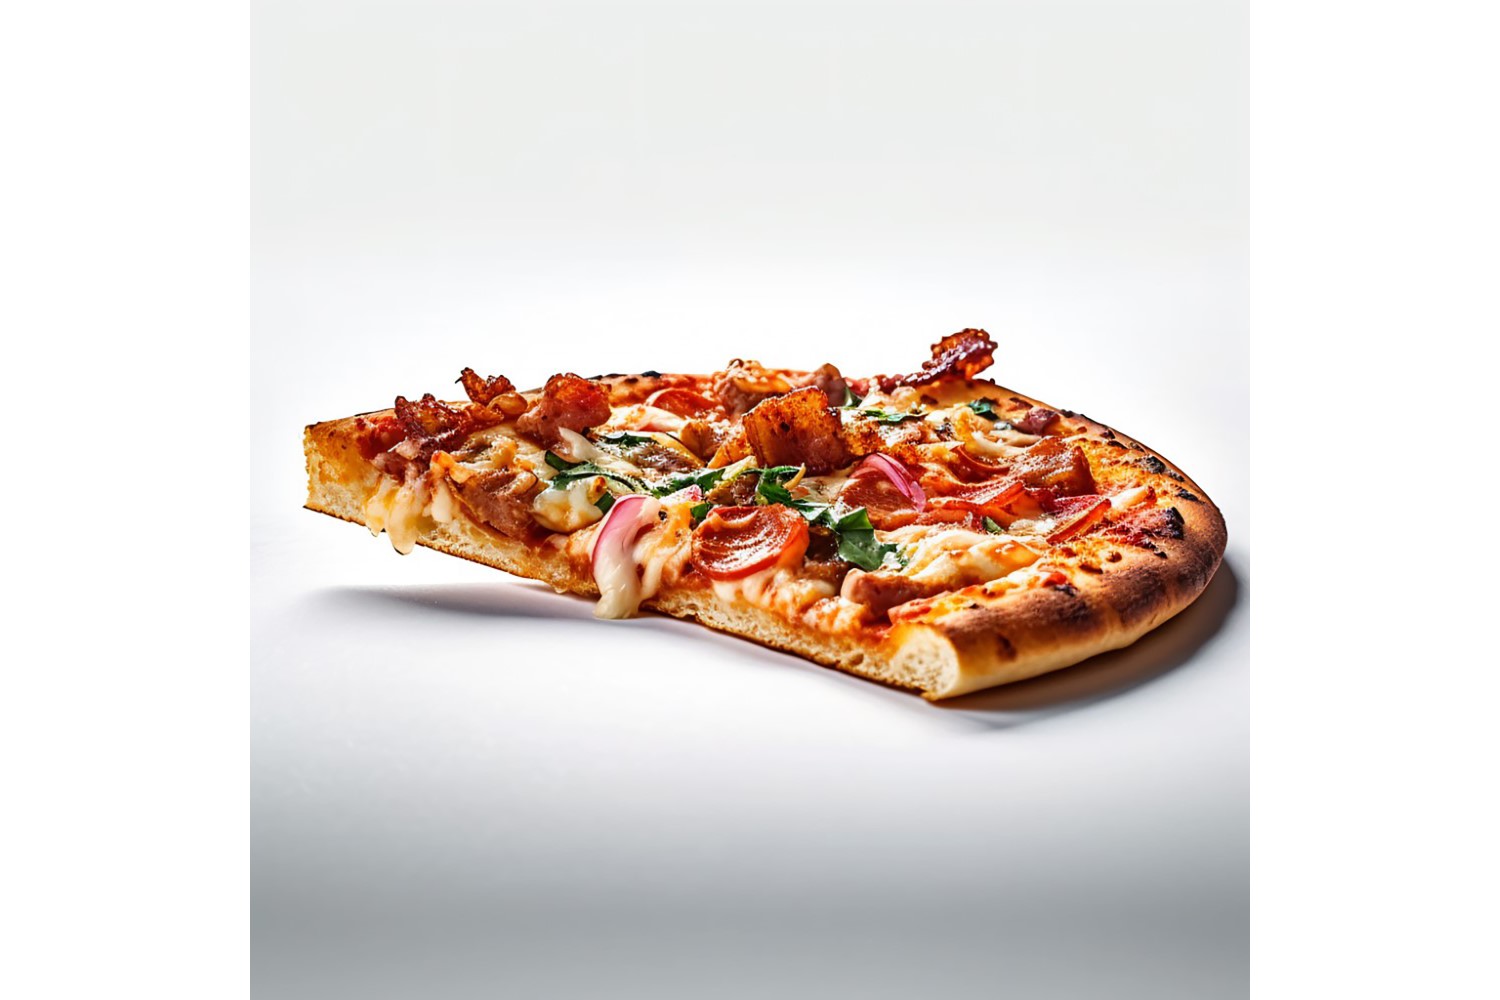 Half Meat Pizza On white background 72